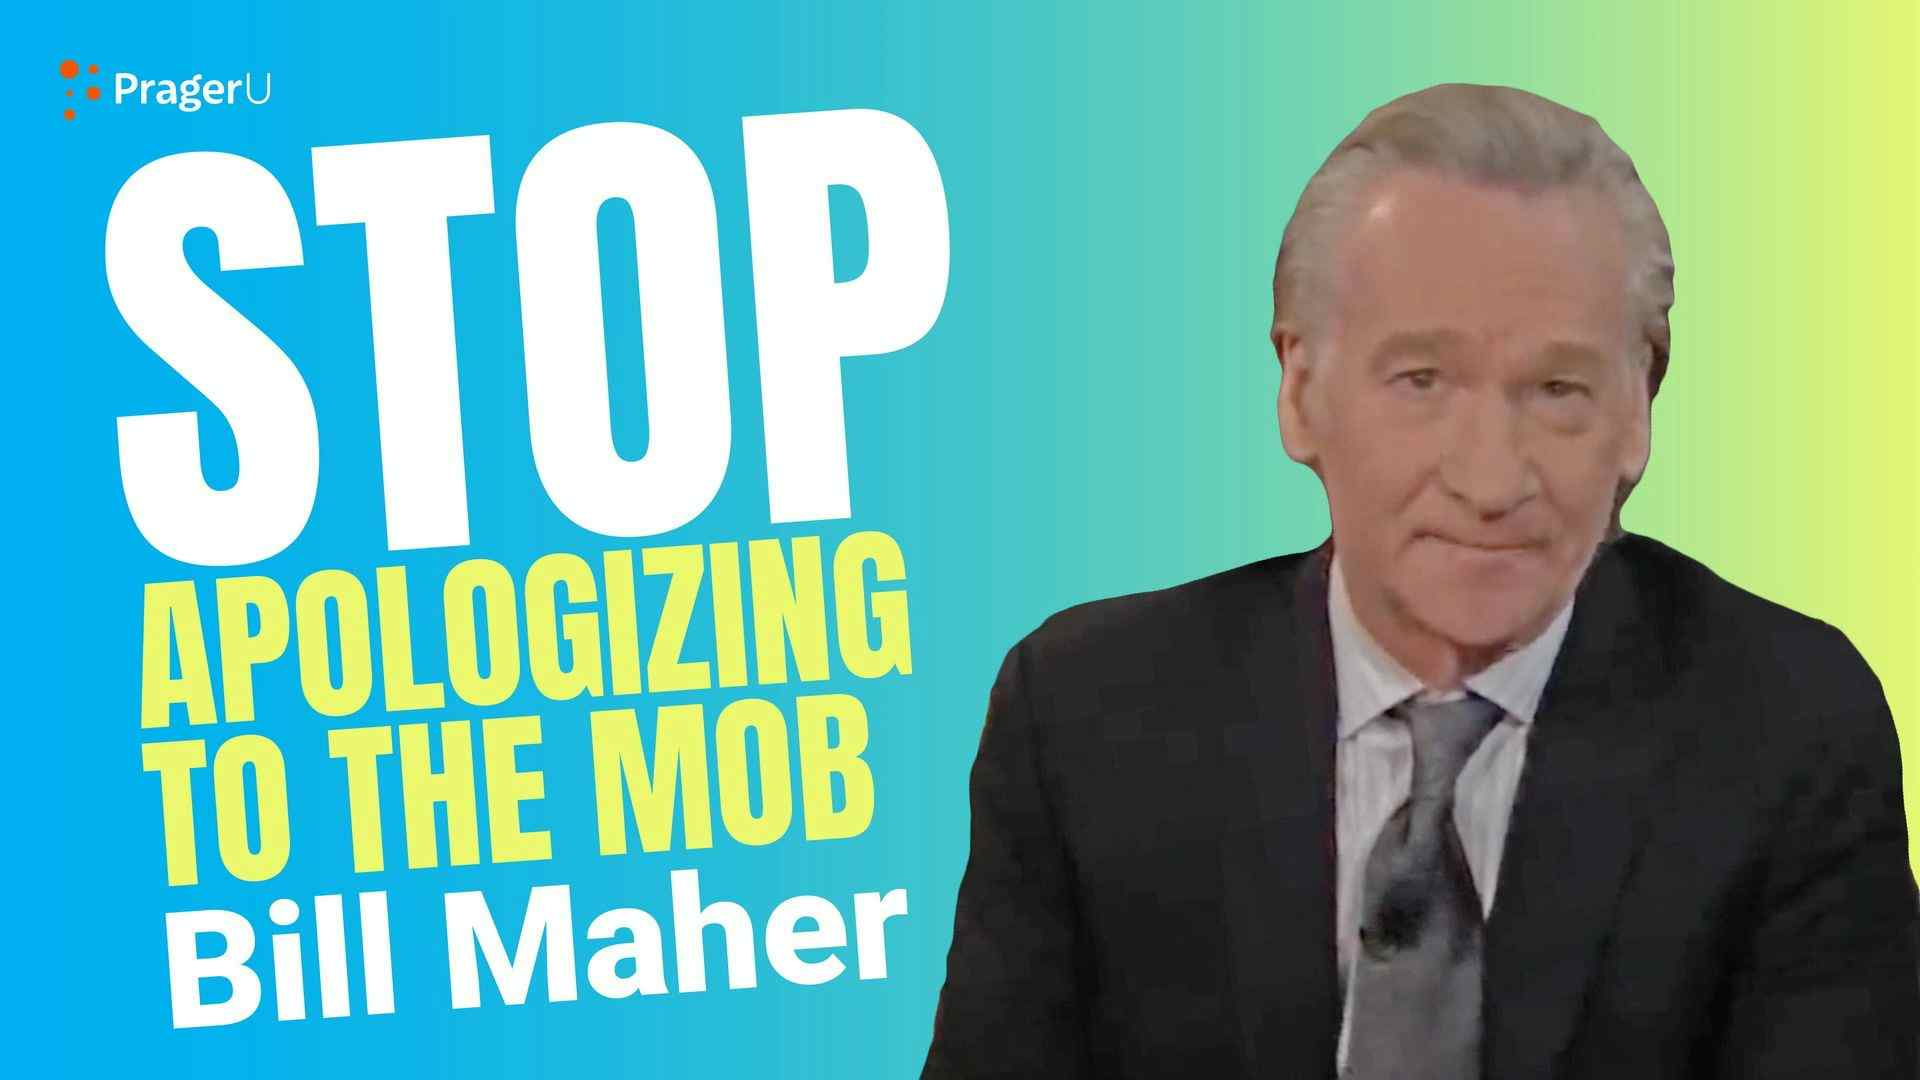 Bill Maher: Stop Apologizing to the Mob